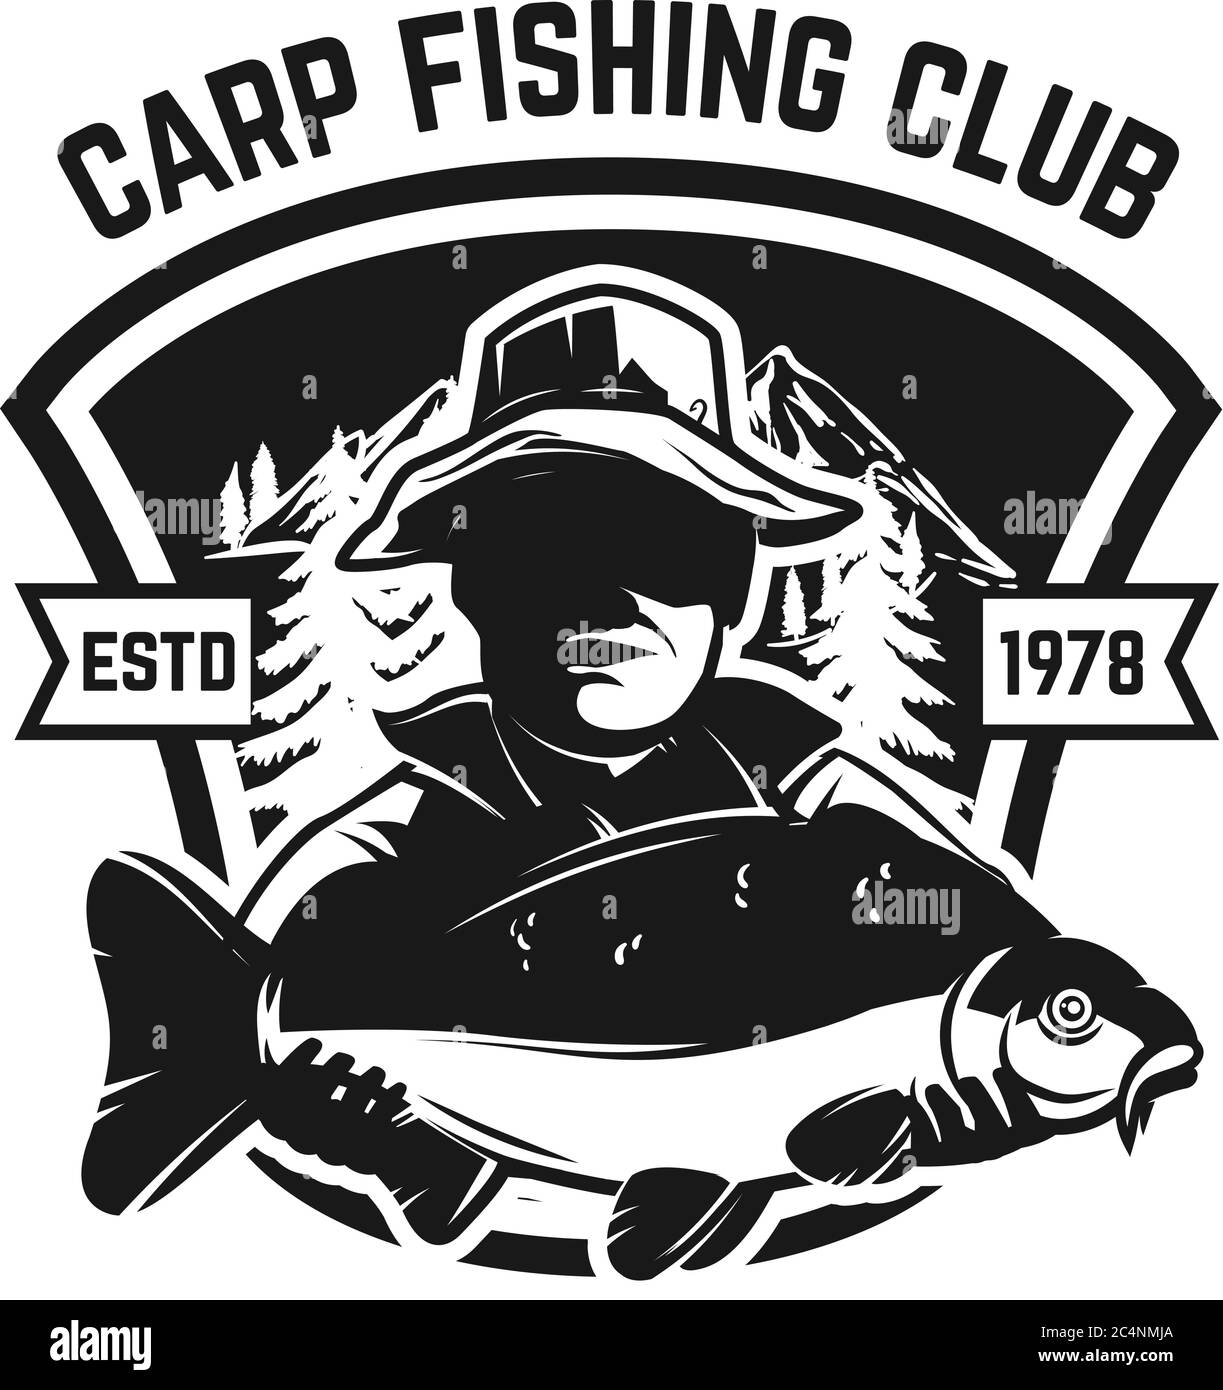 Fishing camp. Emblem template with carp fish. Design element for